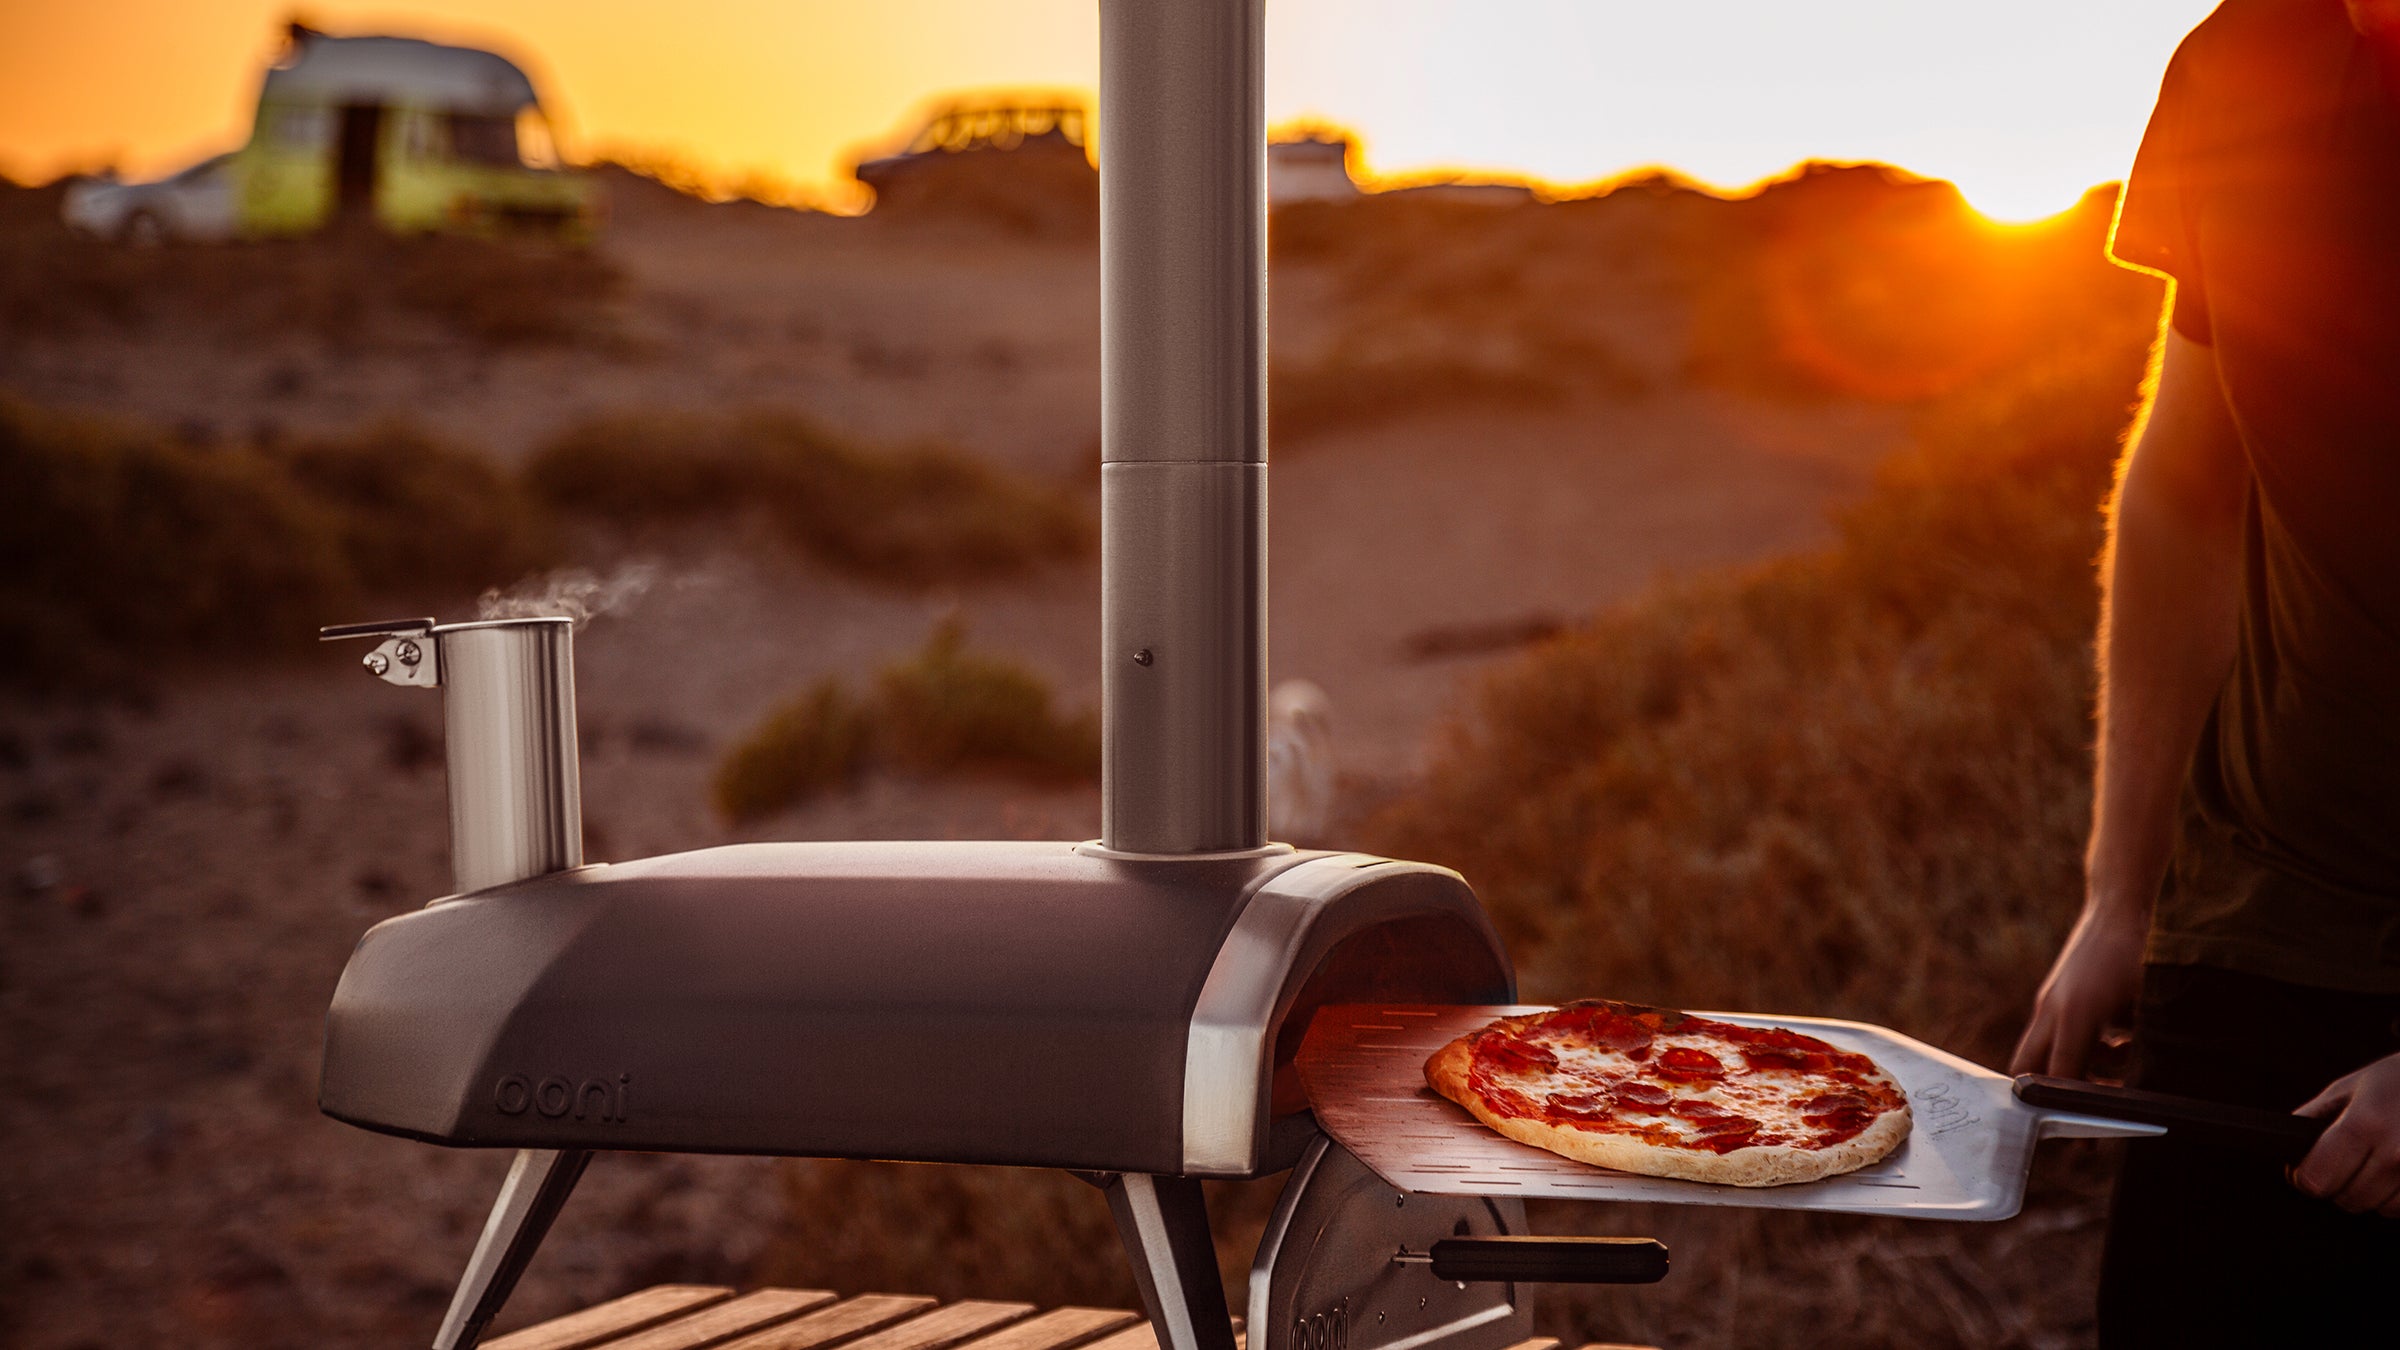 Our Favorite Pizza Ovens from Ooni Are on Sale for a Limited Time